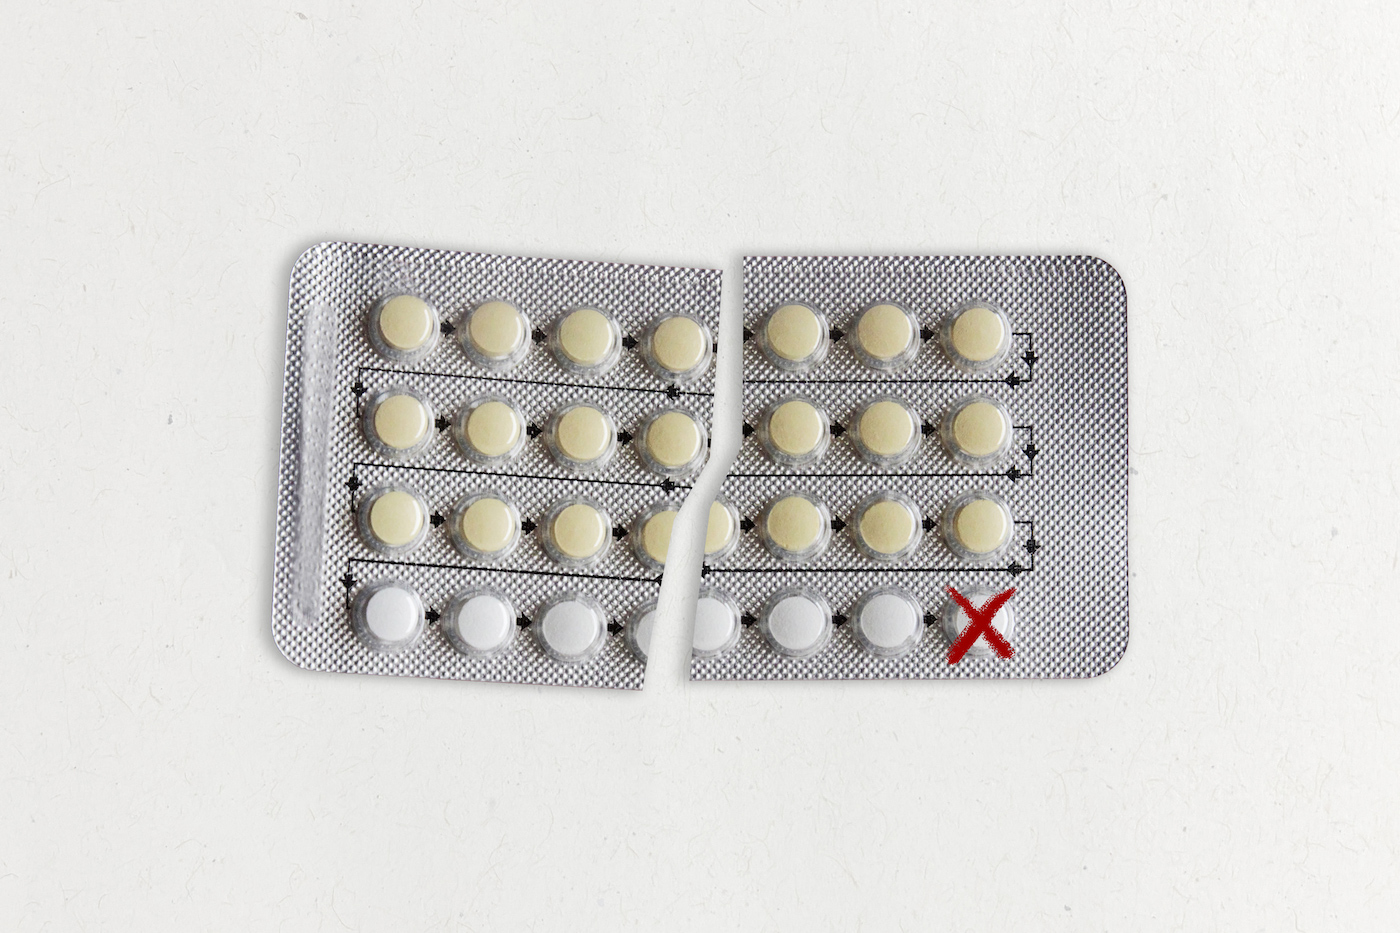 An illustration shows a blister pack of birth control pills torn in half. A red X mark is drawn over the last pill in the pack.